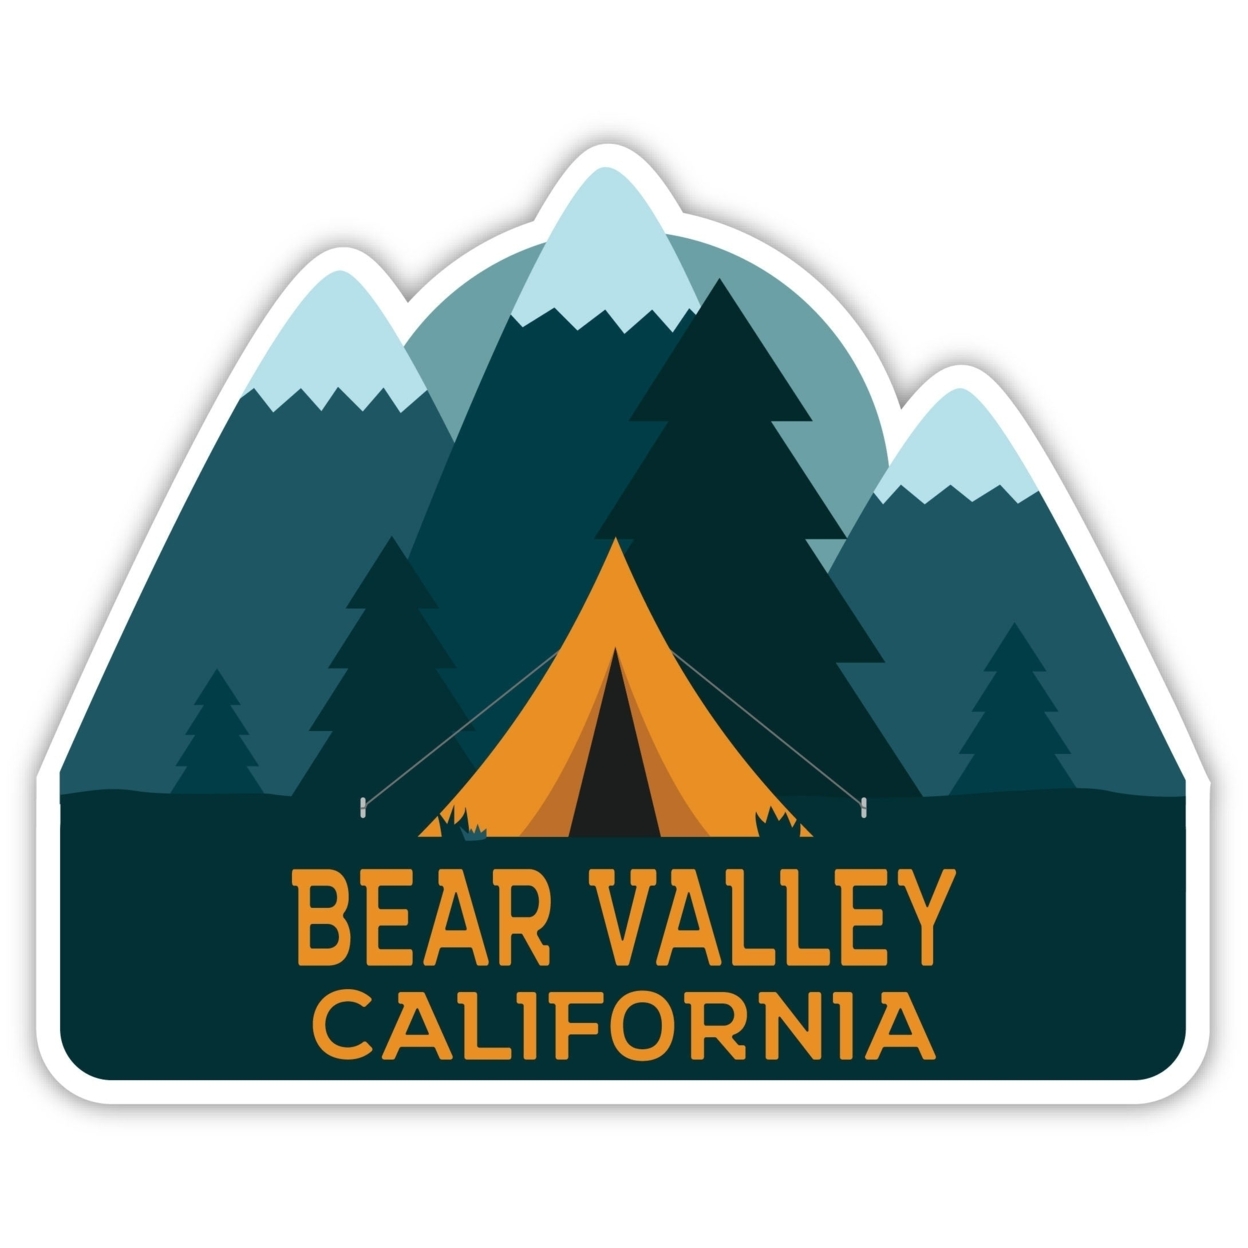 Bear Valley California Souvenir Decorative Stickers (Choose Theme And Size) - 4-Pack, 10-Inch, Tent